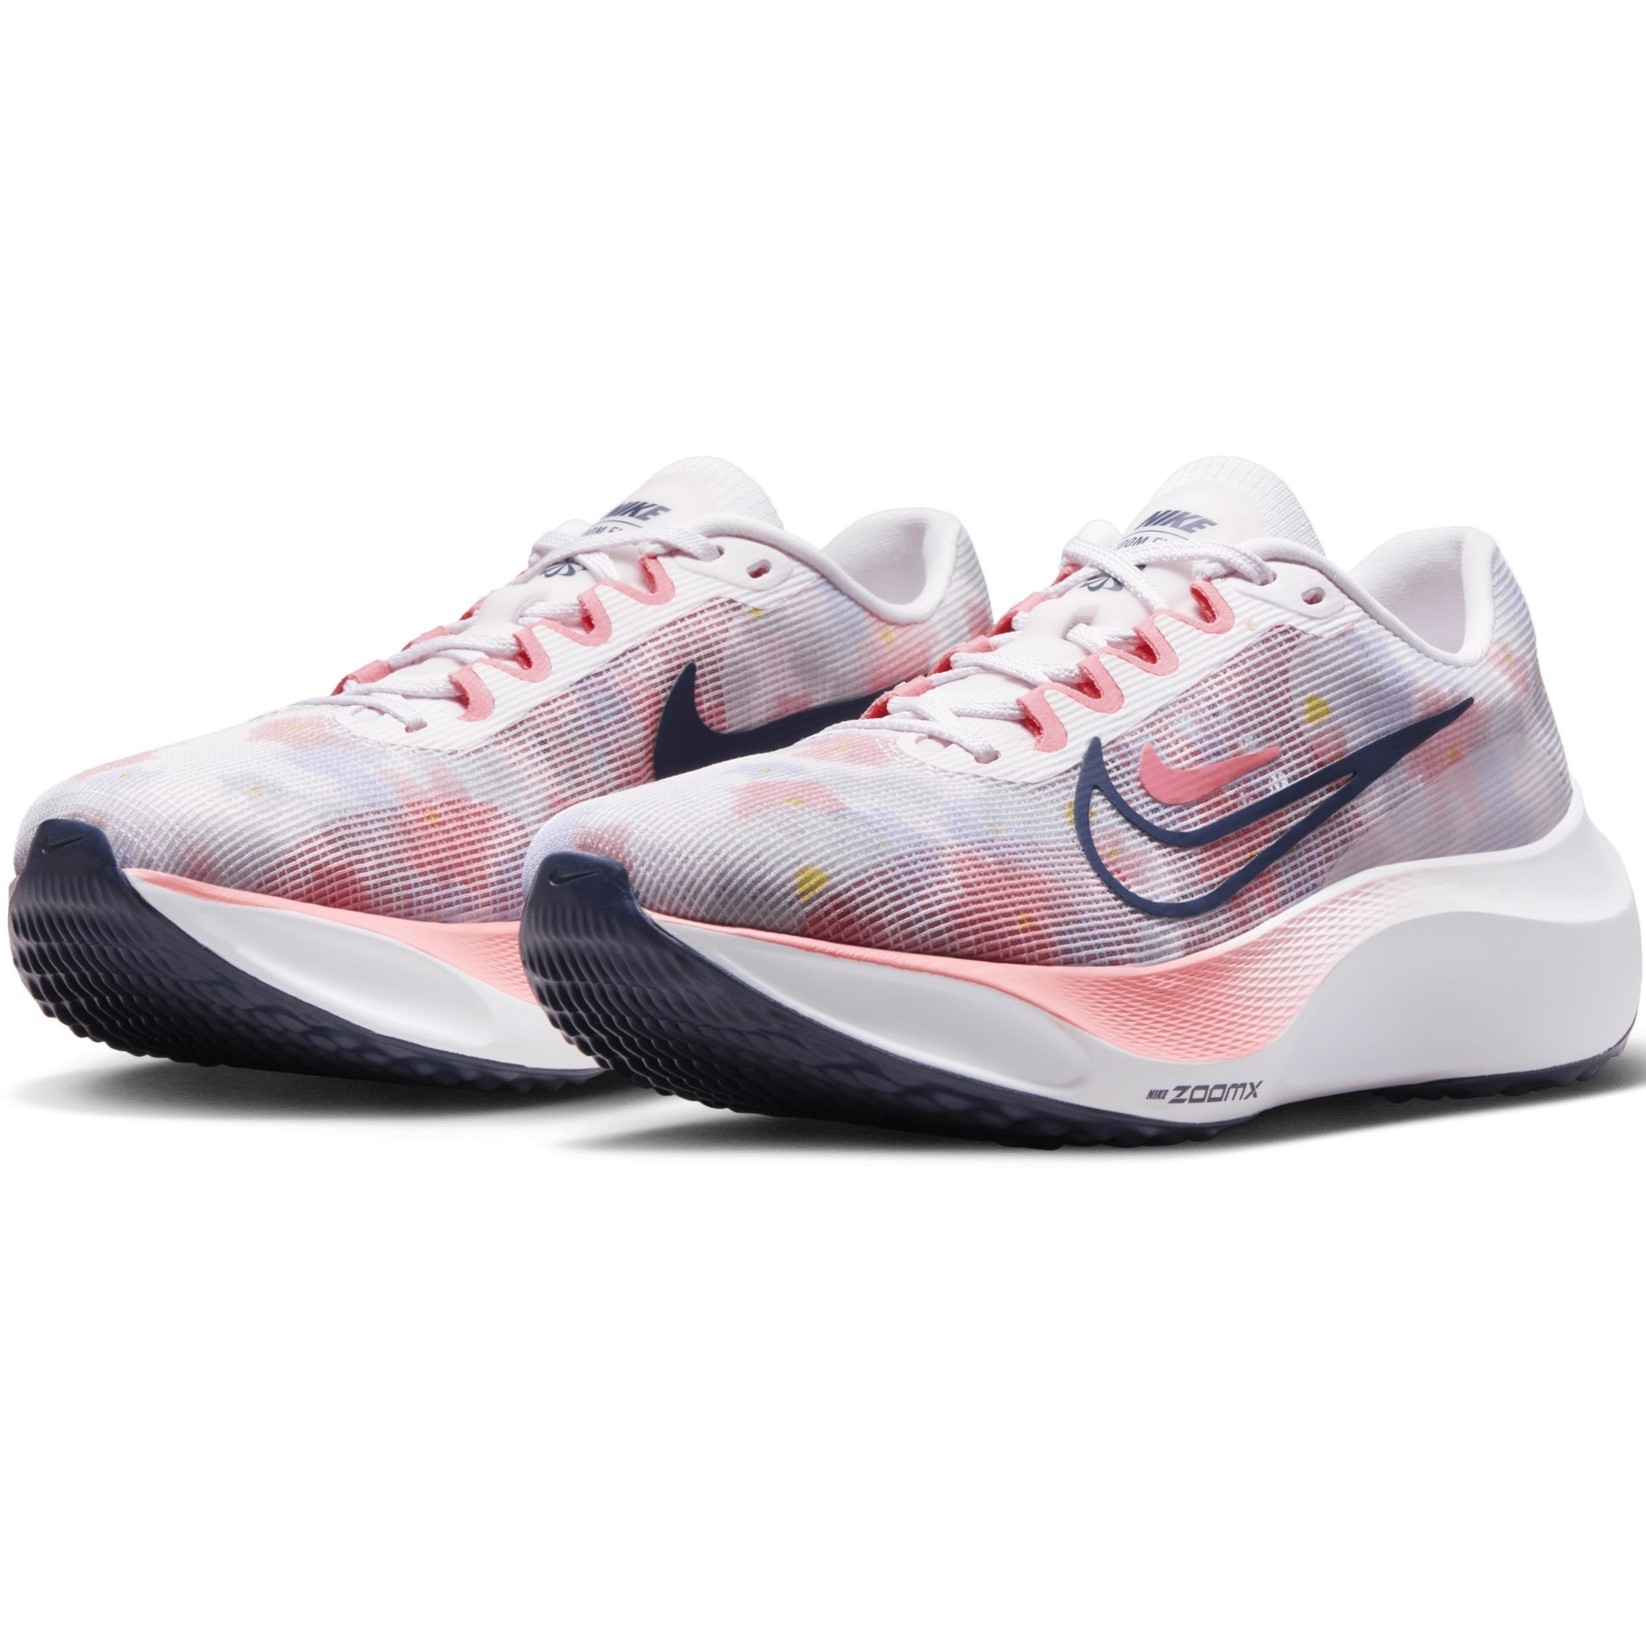 GIÀY NIKE NỮ ZOOM FLY 5 PREMIUM WOMEN ROAD RUNNING SHOES PEARL PINK DV7894-600 6